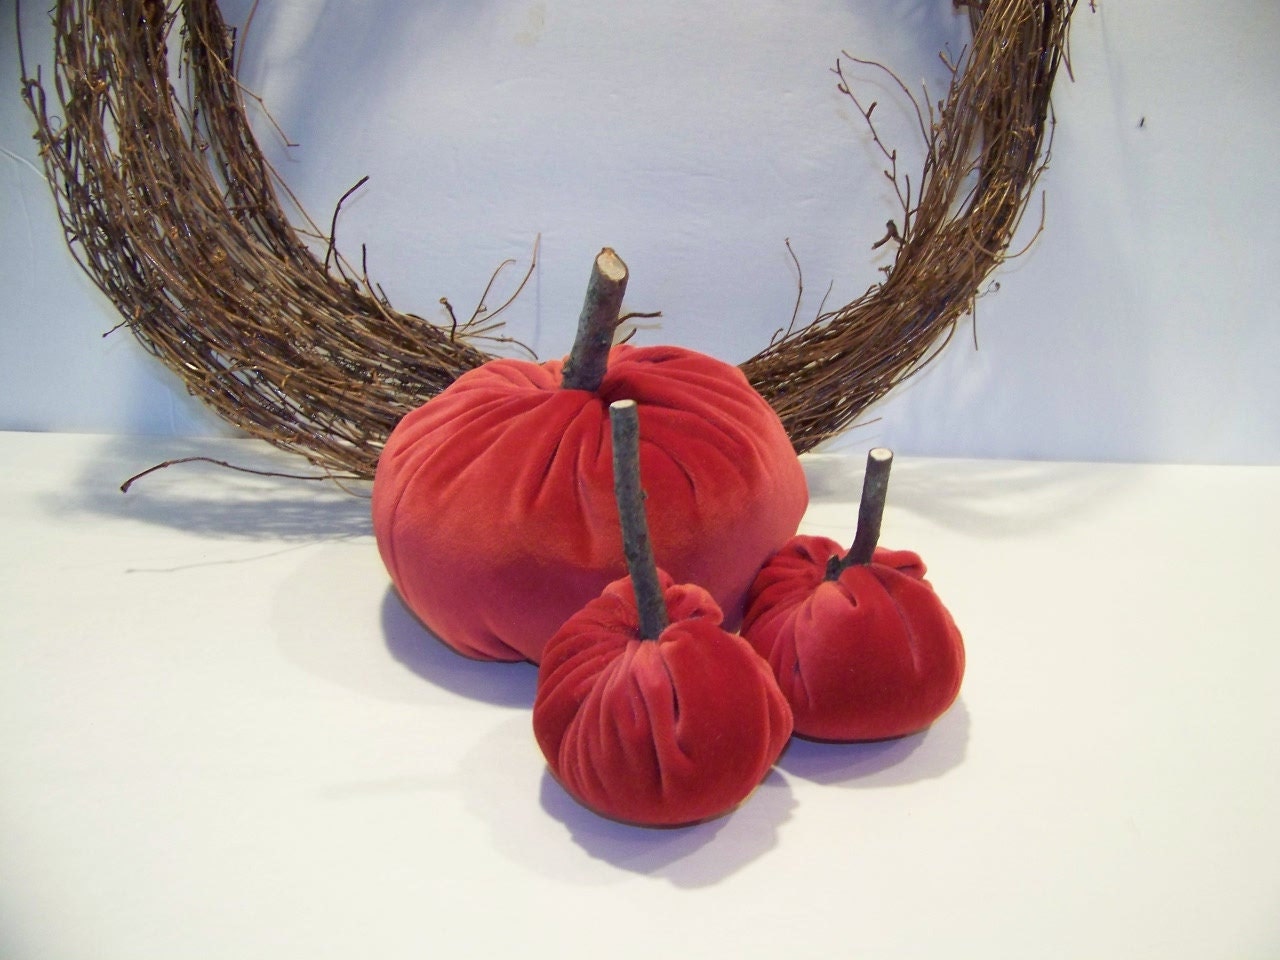 Handmade Collection of 3 Velvet Fabric Pumpkins for Fall Holiday Decor